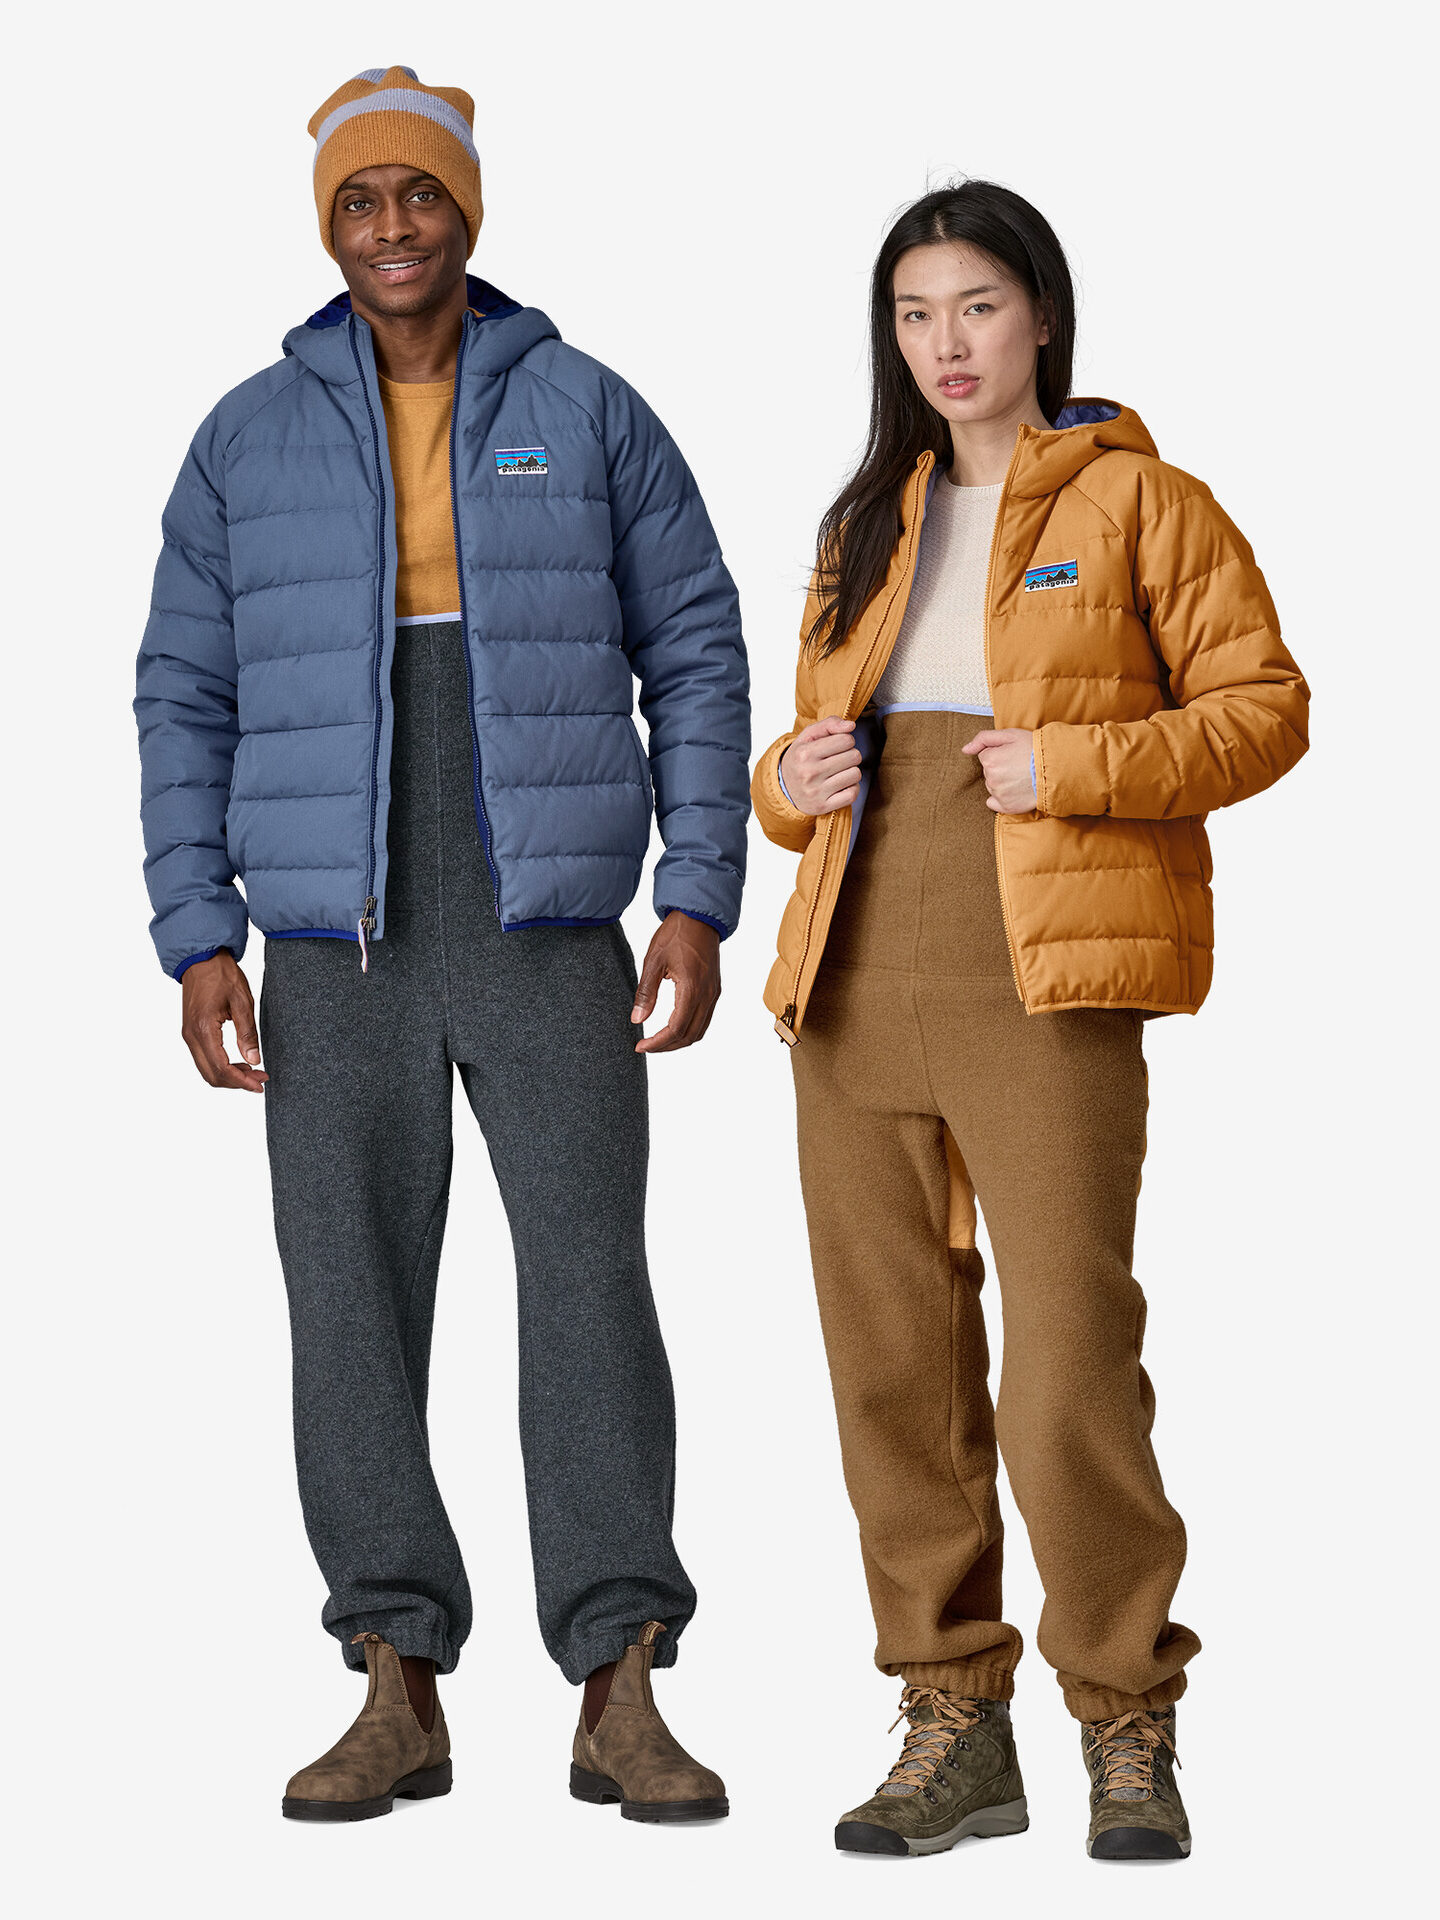 2 models wearing Patagonia puffer jackets in blue and burnt orange. 